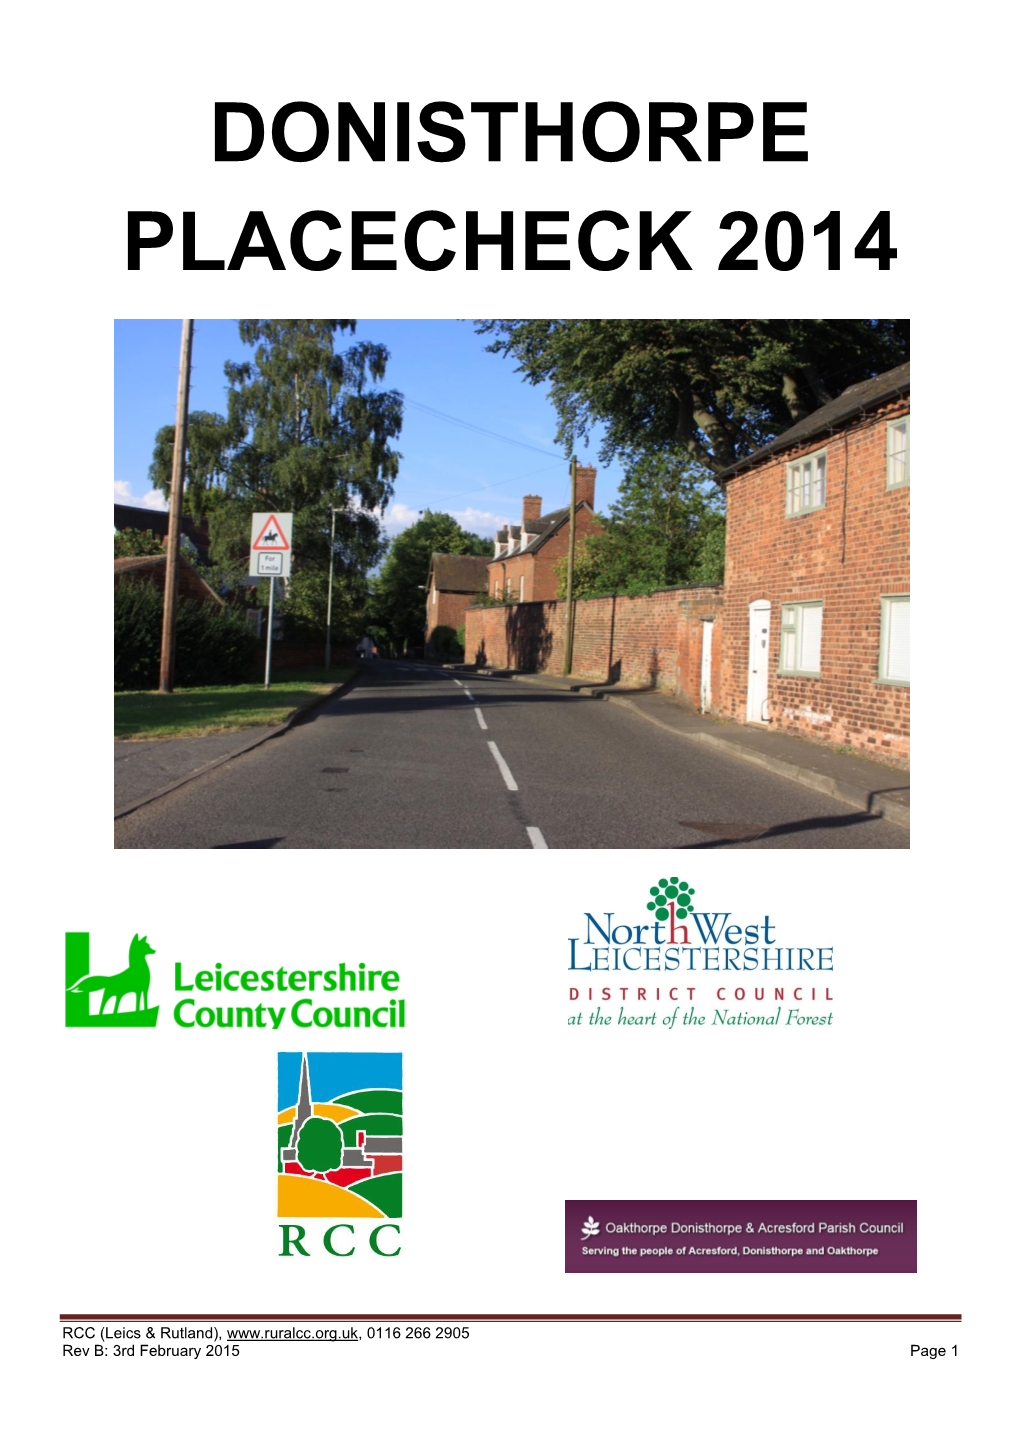 Donisthorpe Placecheck 2014